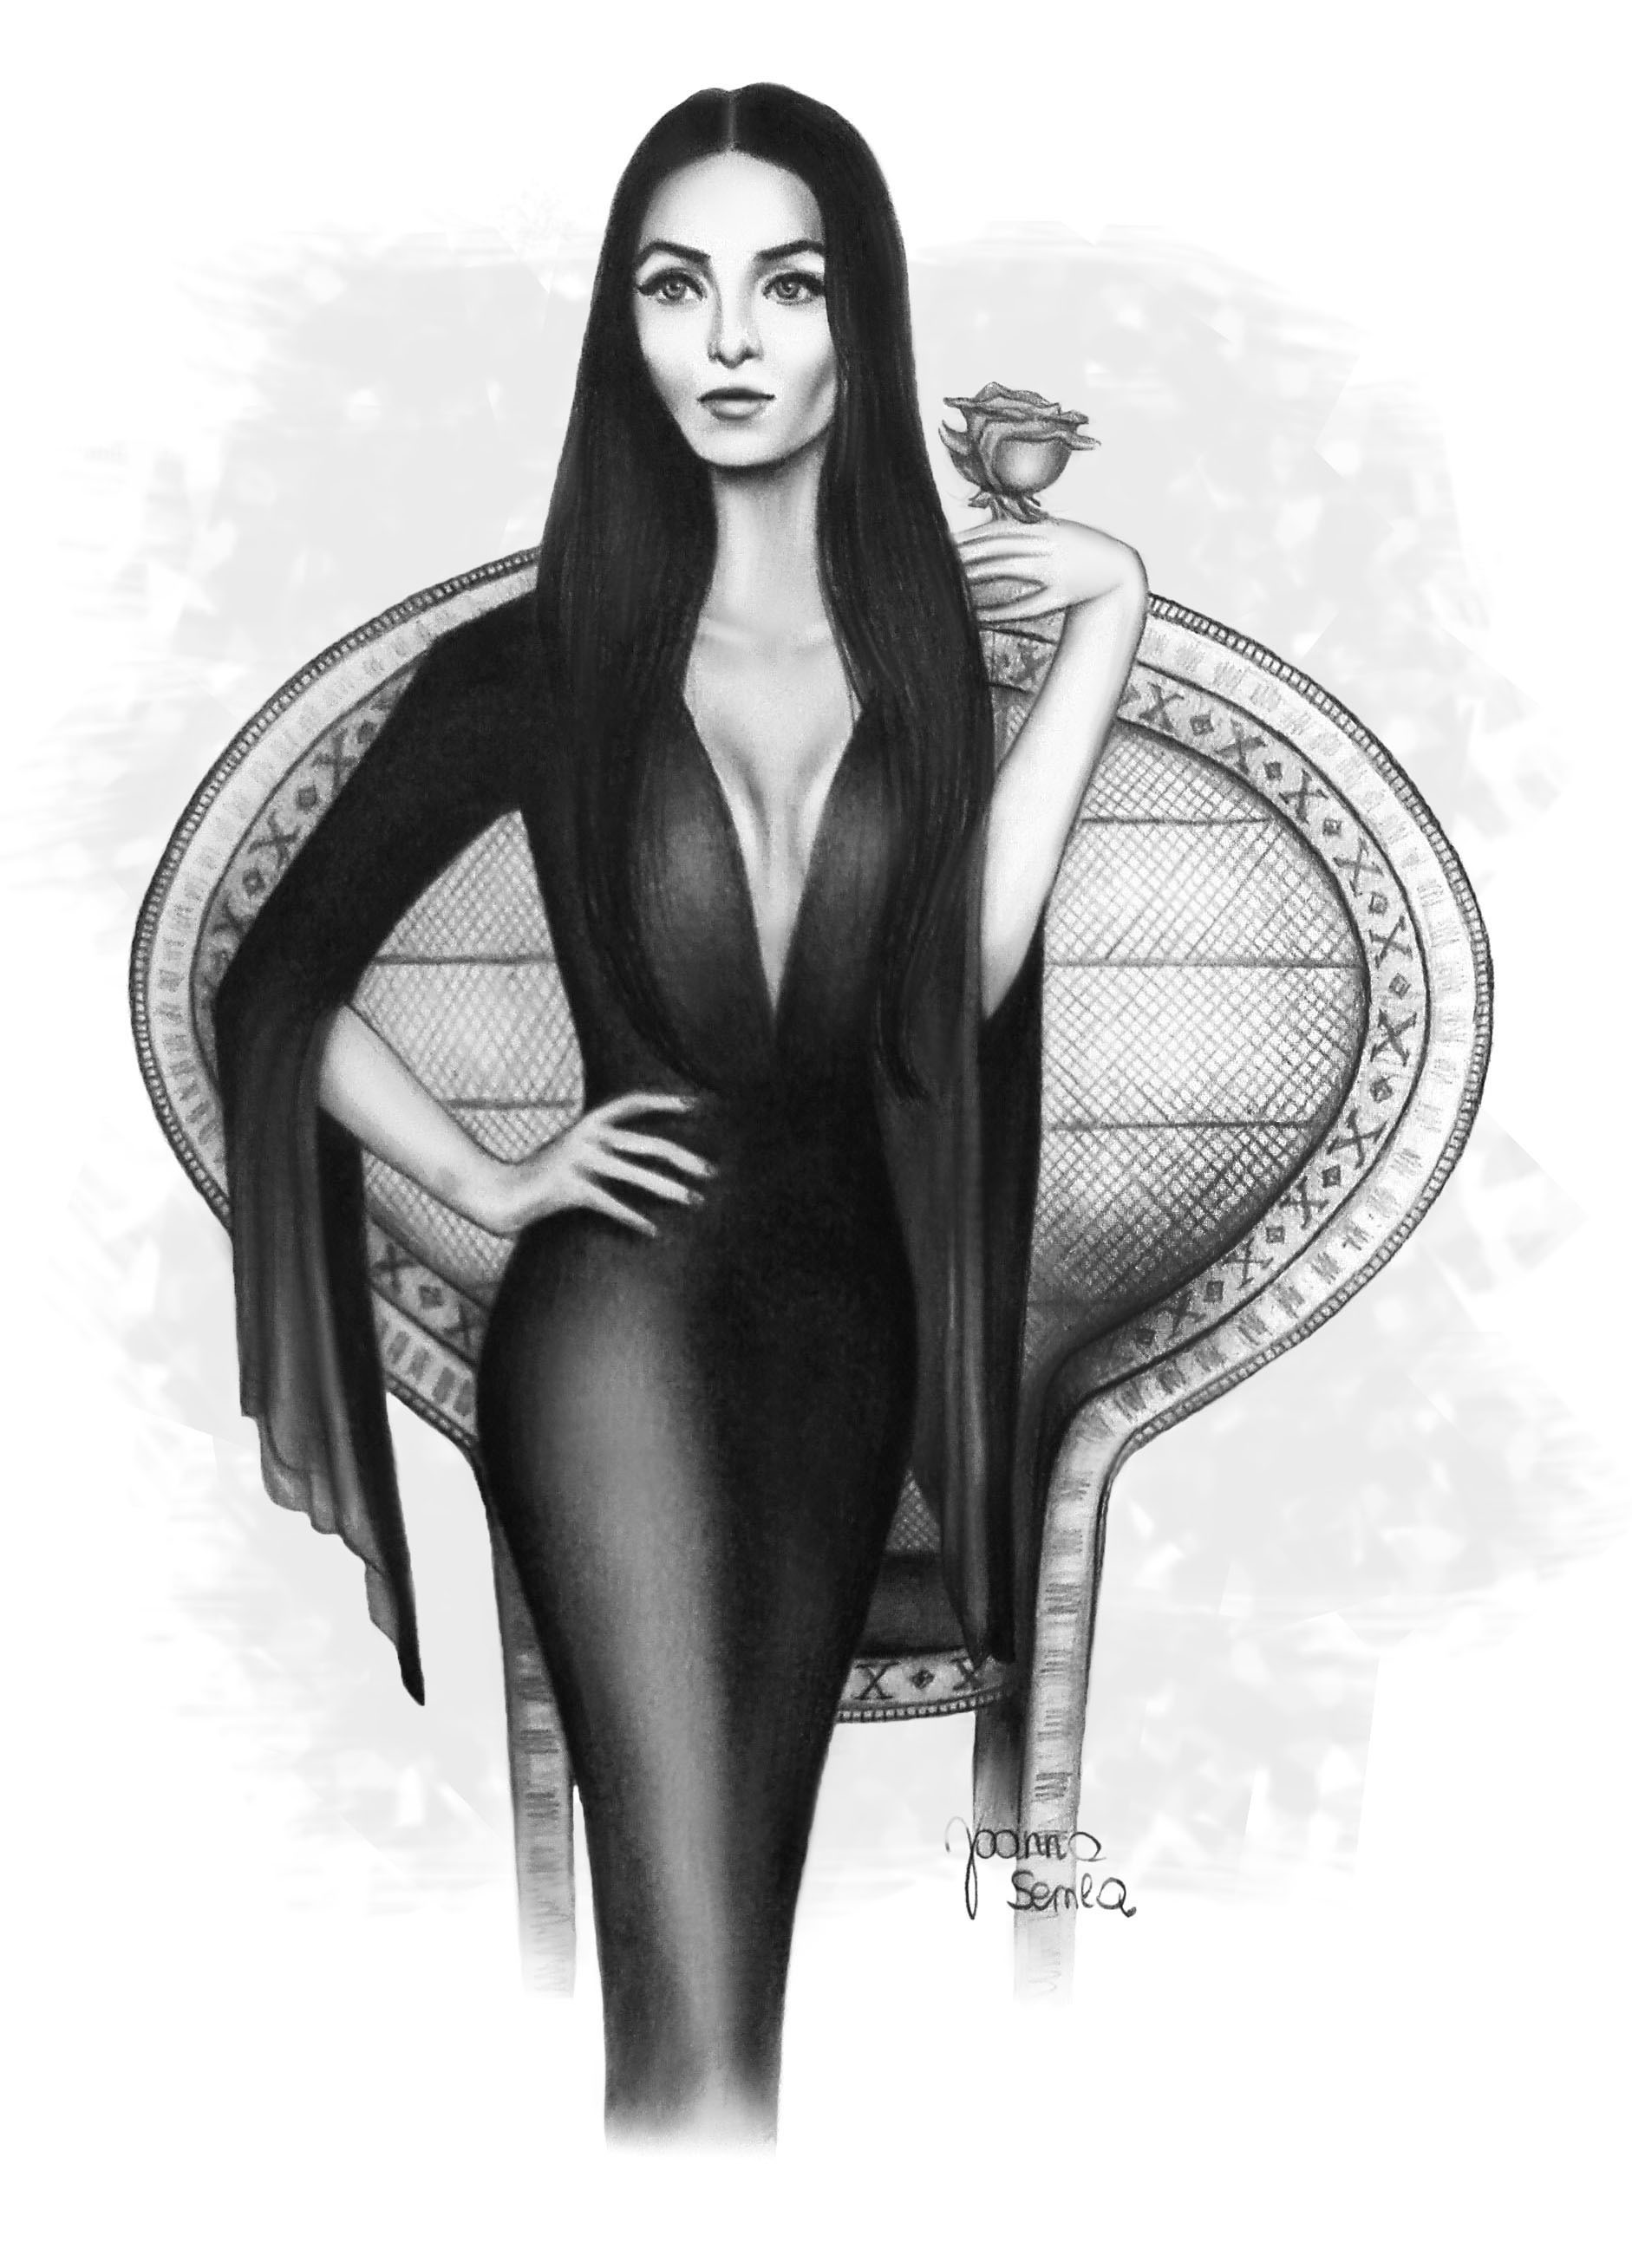 Inspired by Carolyn Jones as Morticia Addams - 'The Addams Family&apos...